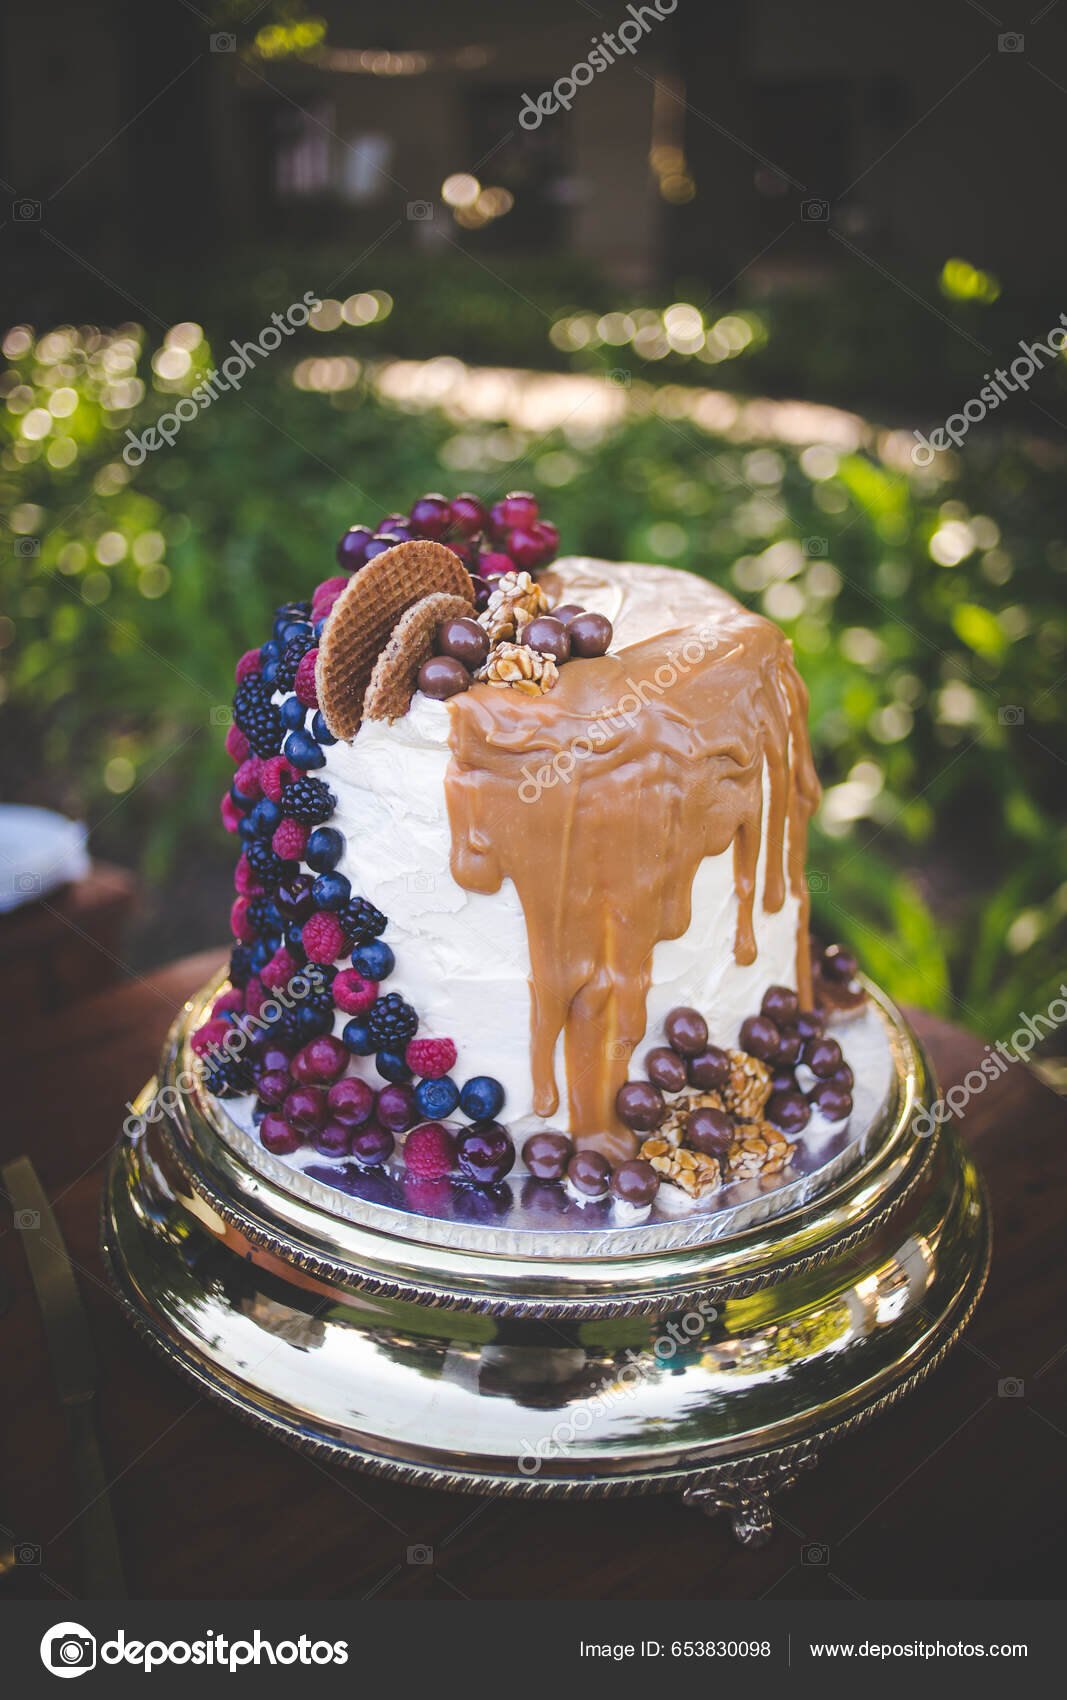 A plentiful array of cakes with a … – License Images – 11166422 ❘ StockFood